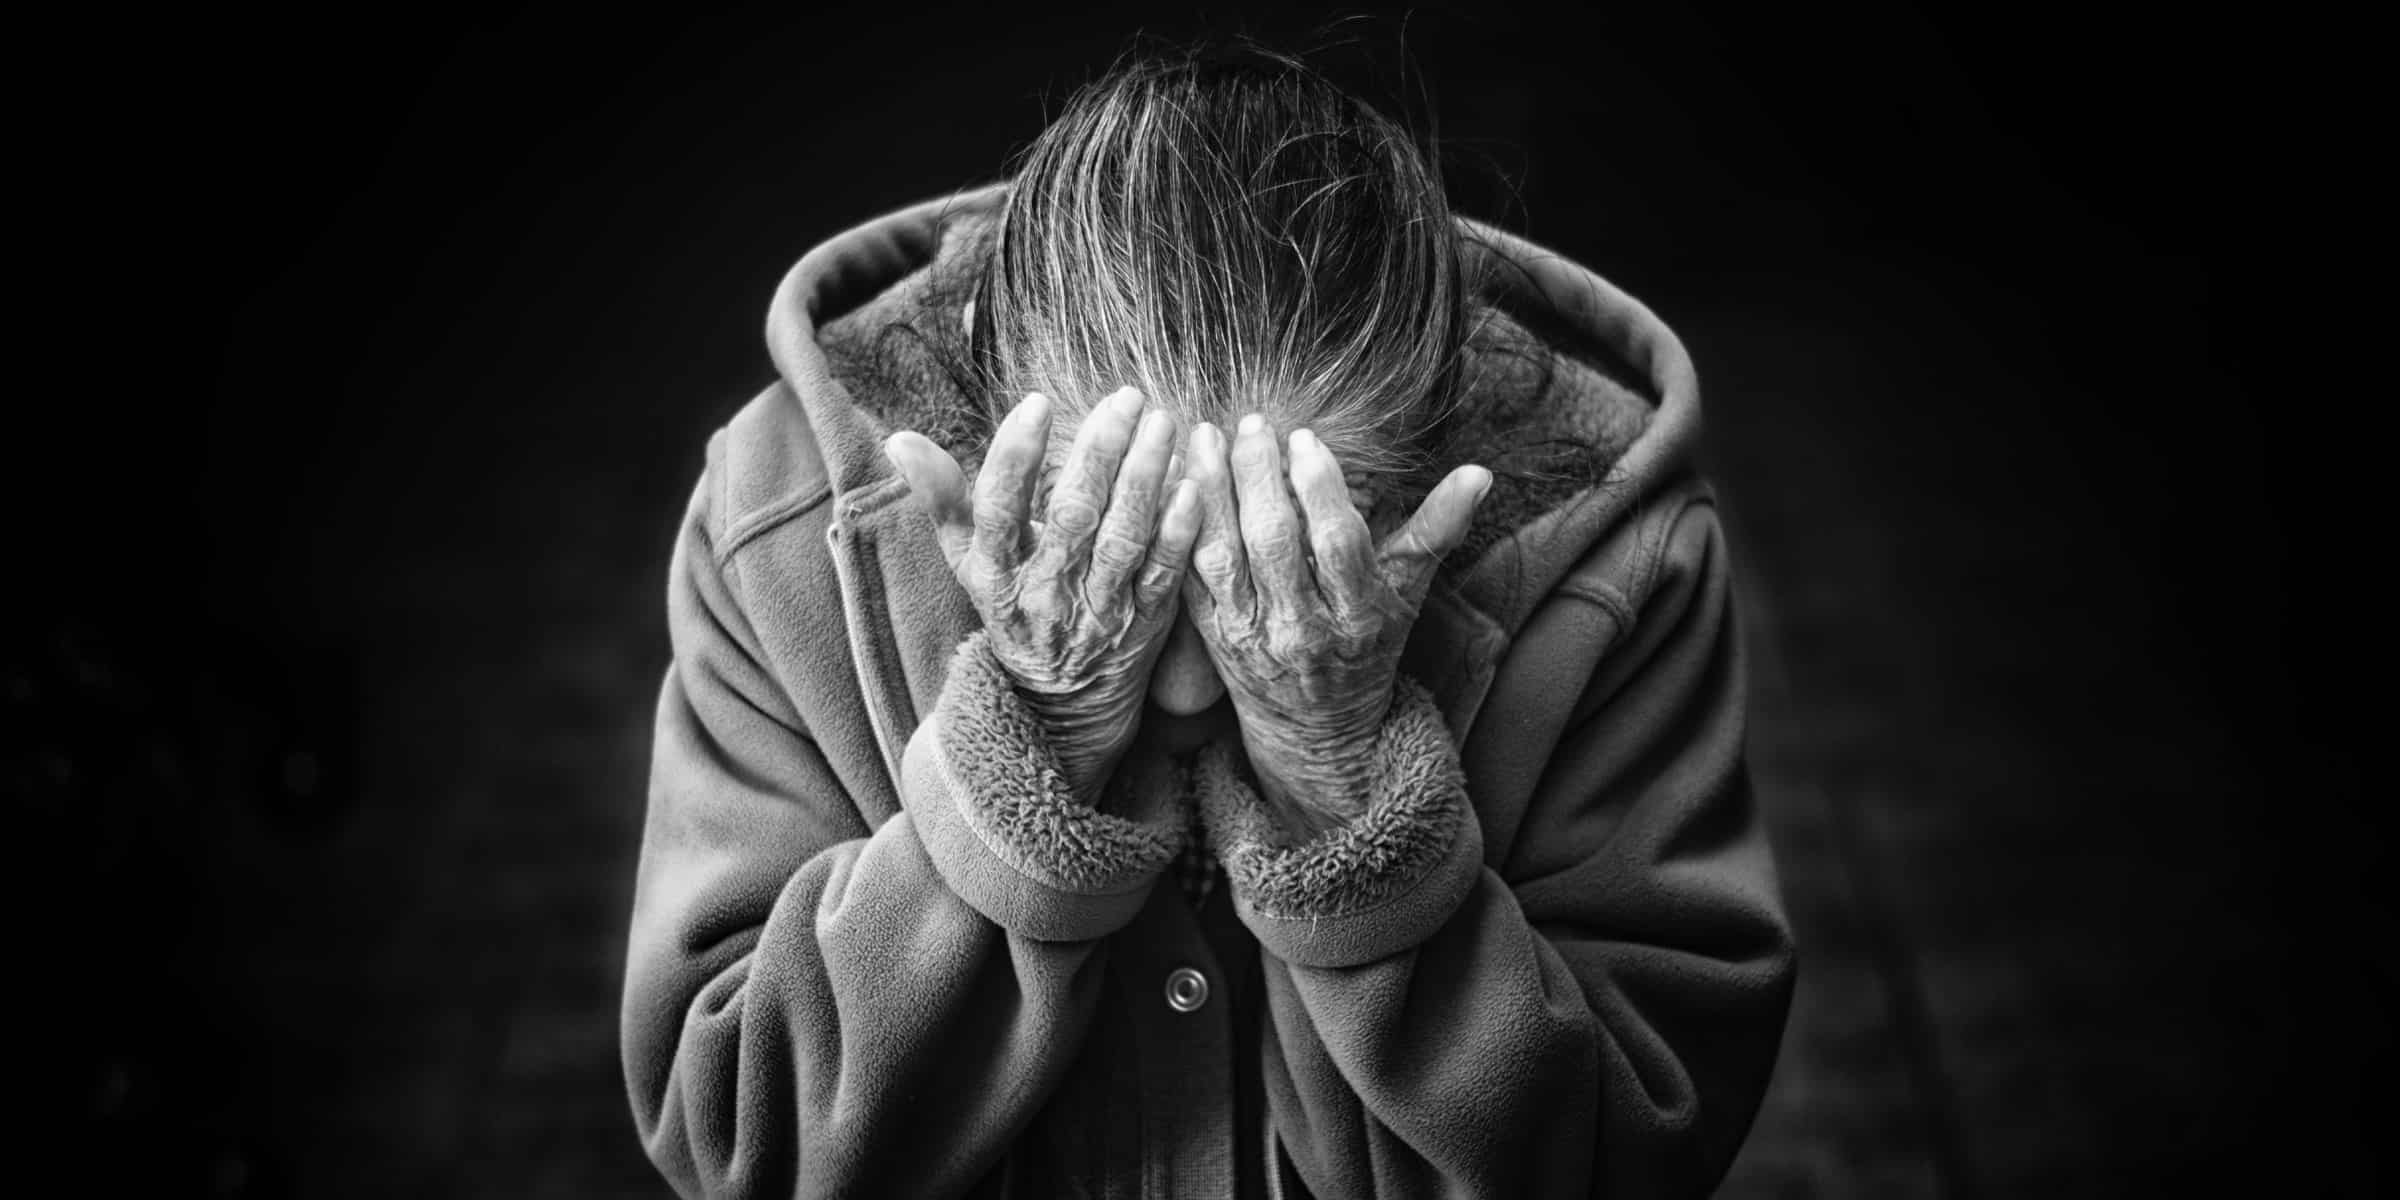 Elder Abuse Awareness: Coming together to stop violence towards our most vulnerable citizens